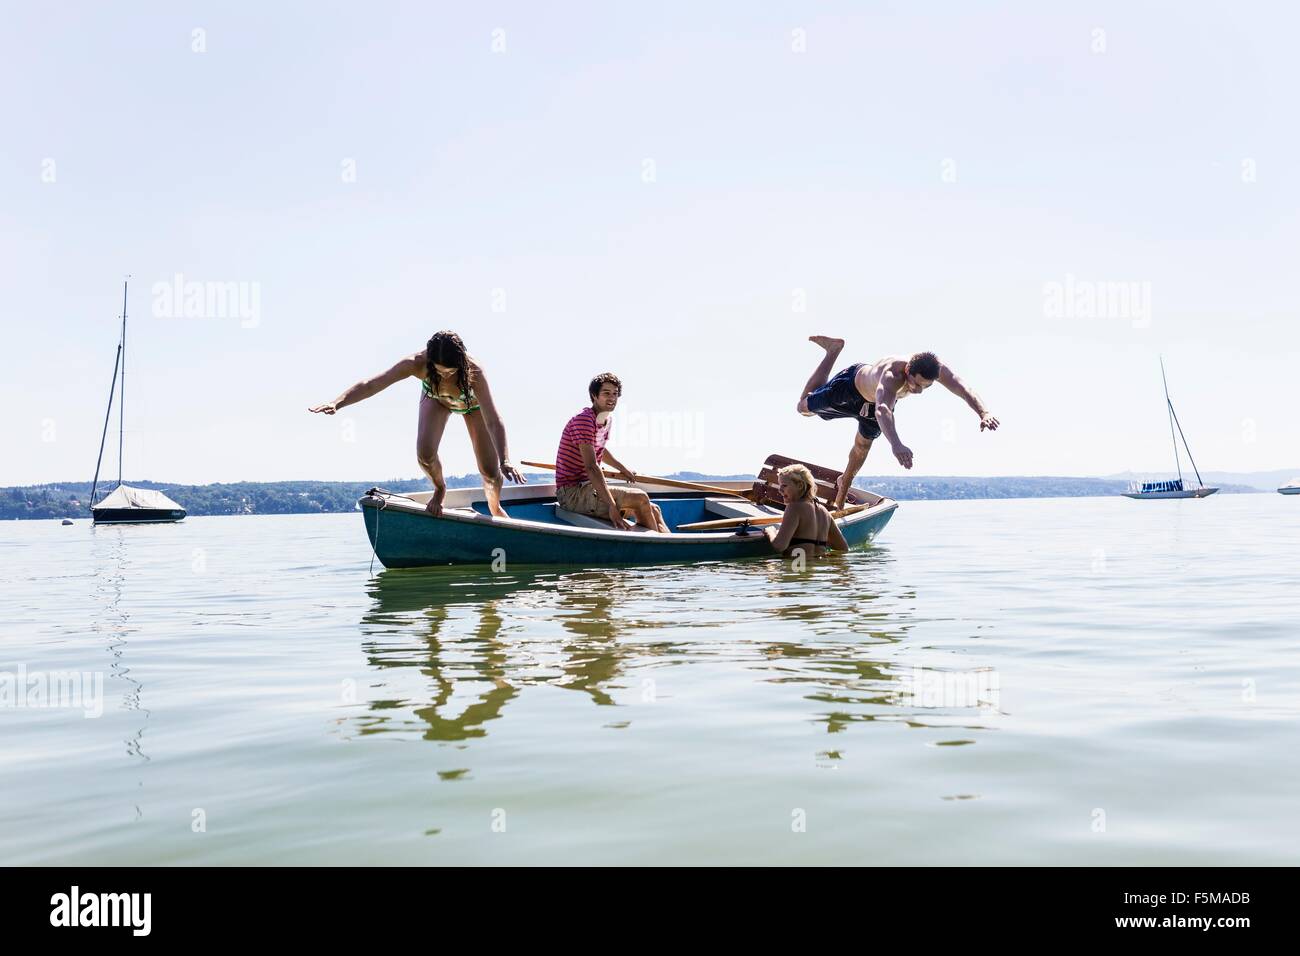 Group of friends diving from boat into lake, Schondorf, Ammersee, Bavaria, Germany Stock Photo